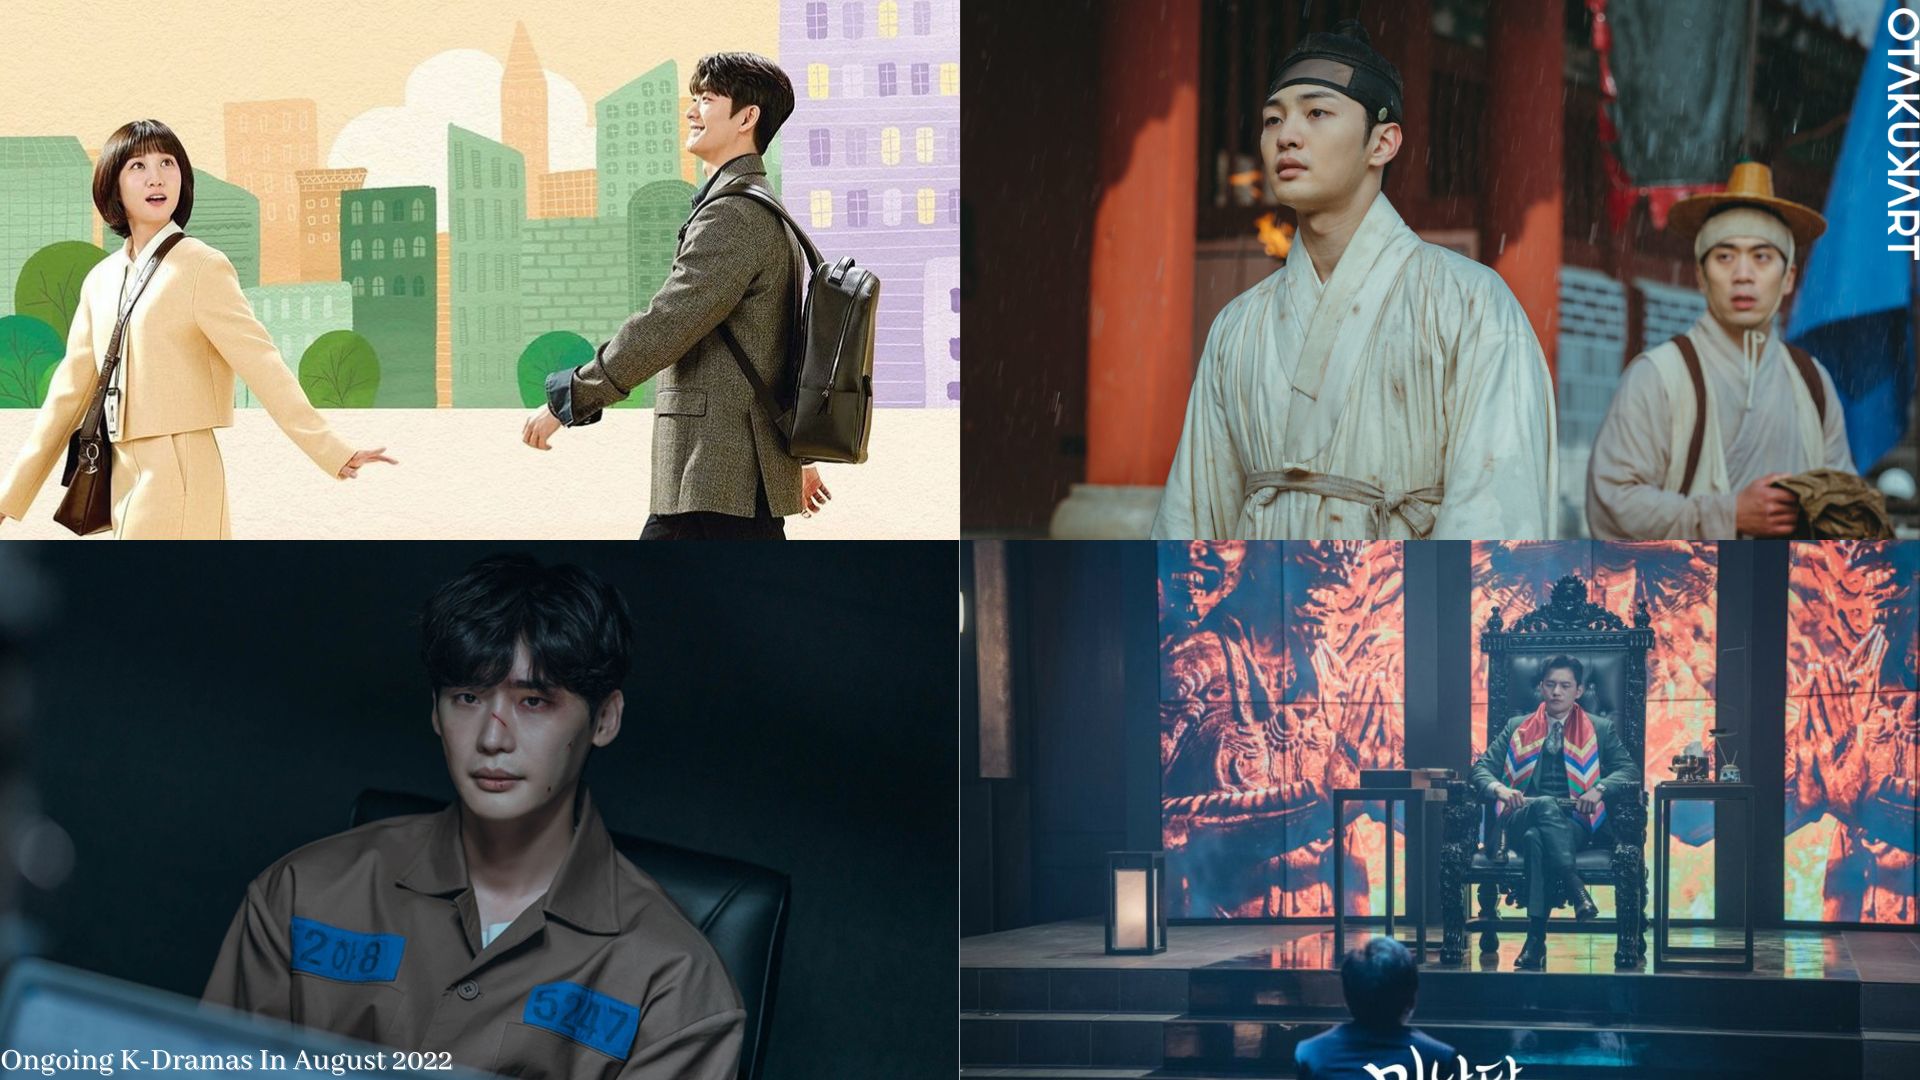 Must Watch Ongoing K-Dramas In August 2022